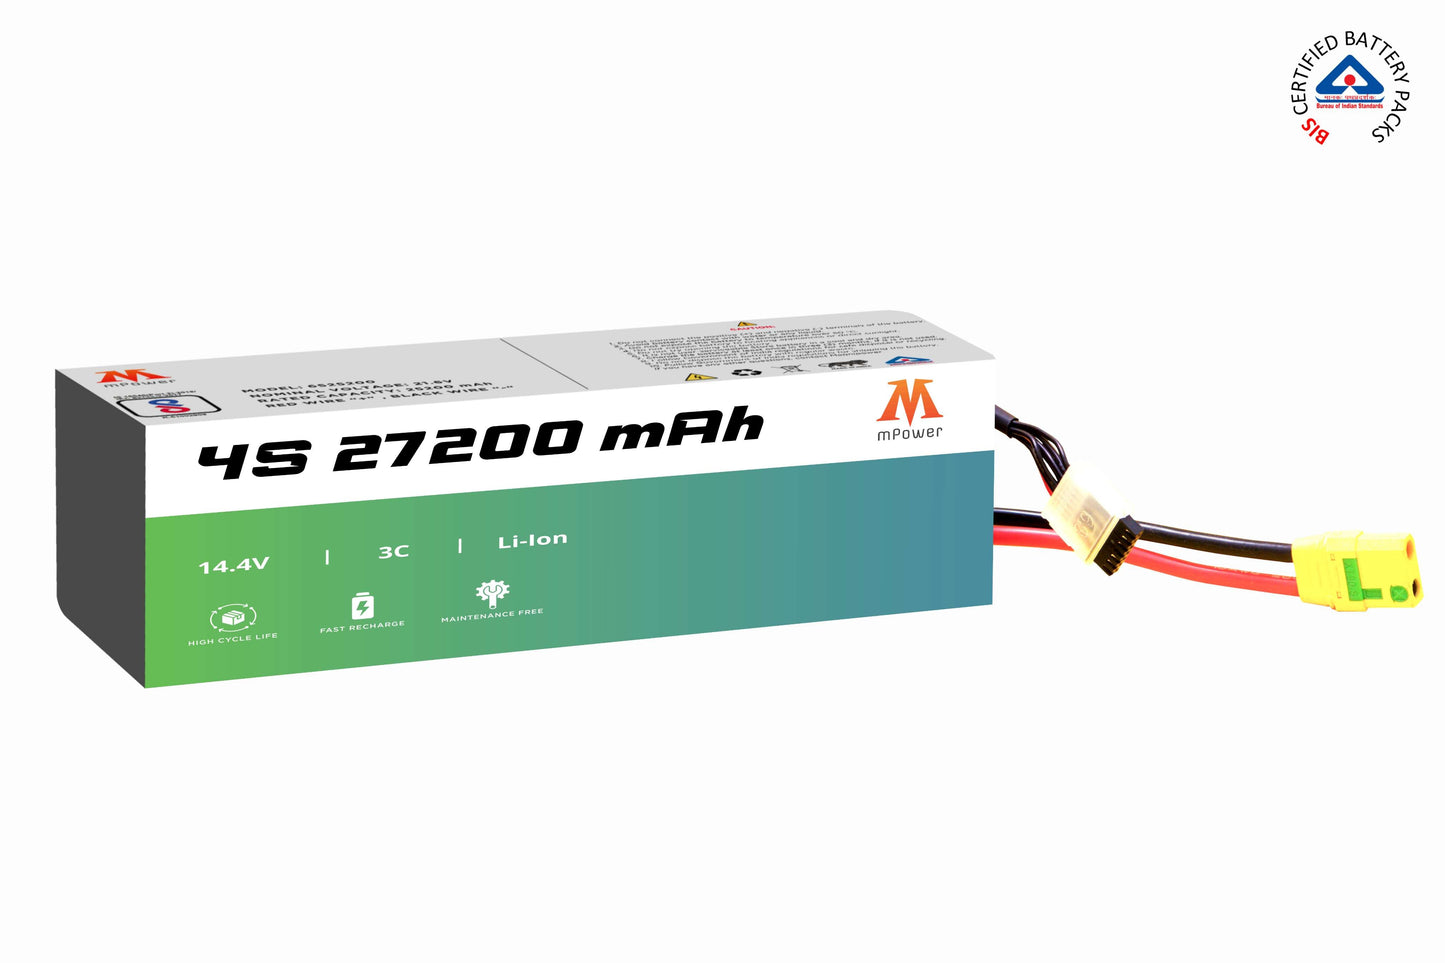 mPower 4S 27200mAh Lithium-Ion Battery for Survey Drones